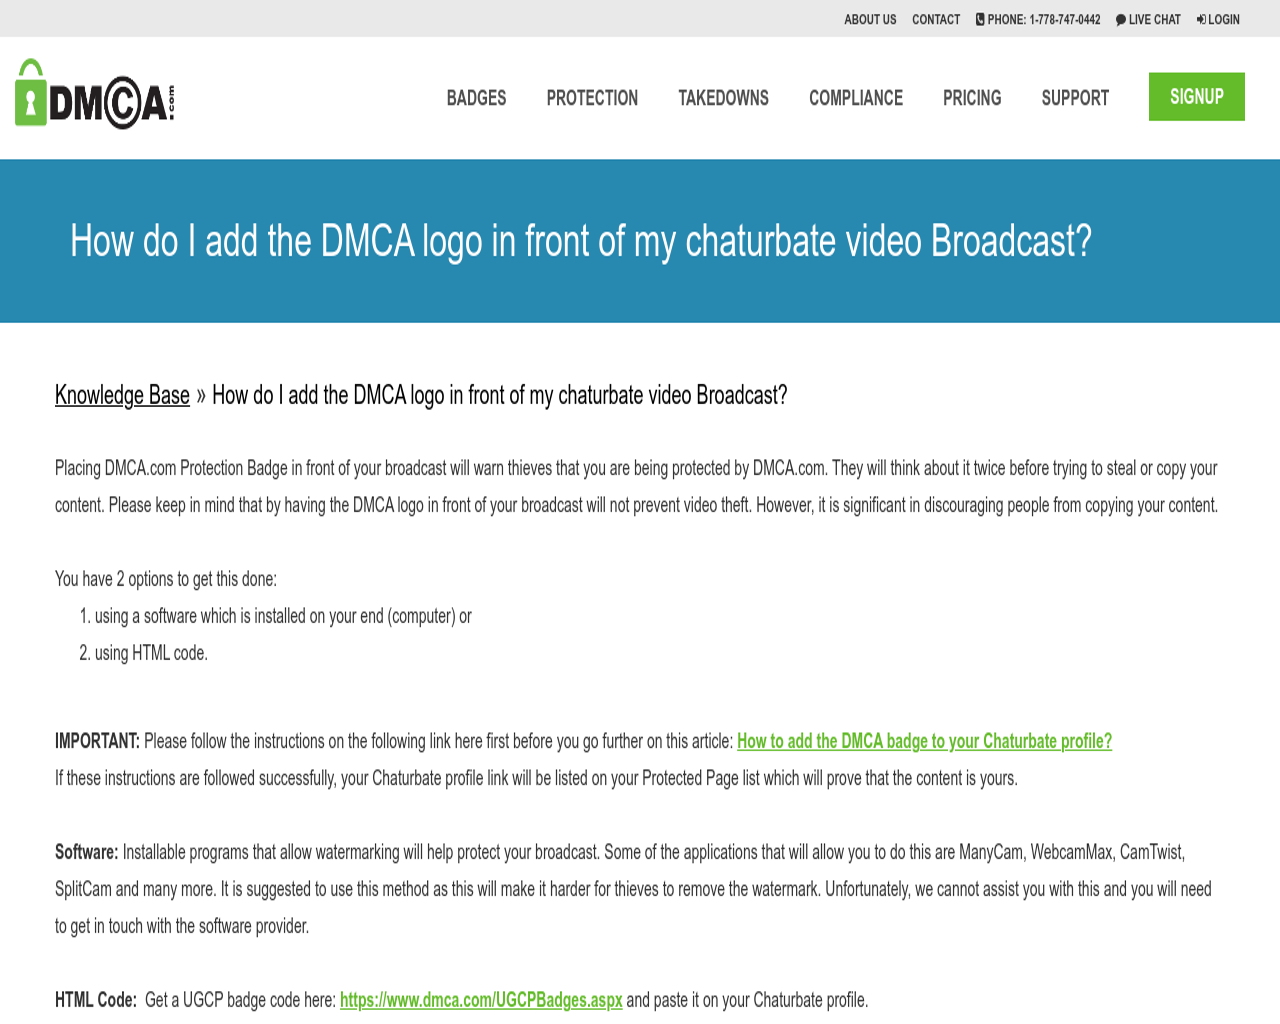 How do I add the DMCA logo in front of my chaturbate video Broadcast?